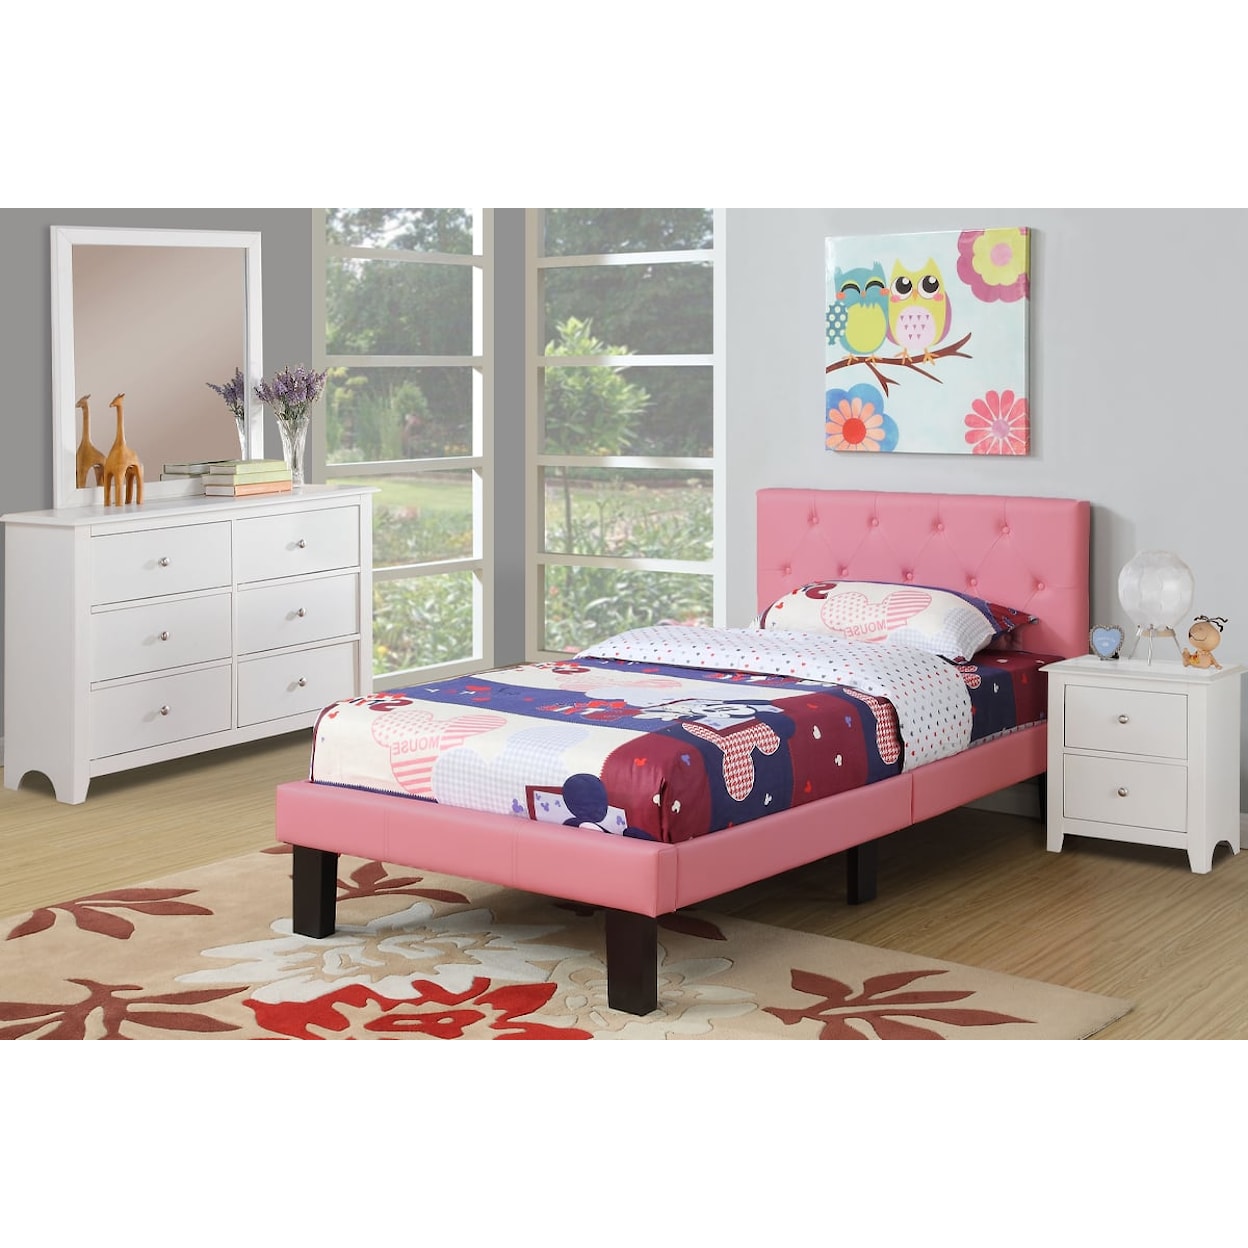 Poundex Twin/Full Beds PINK FULL BED W/ SLATS |